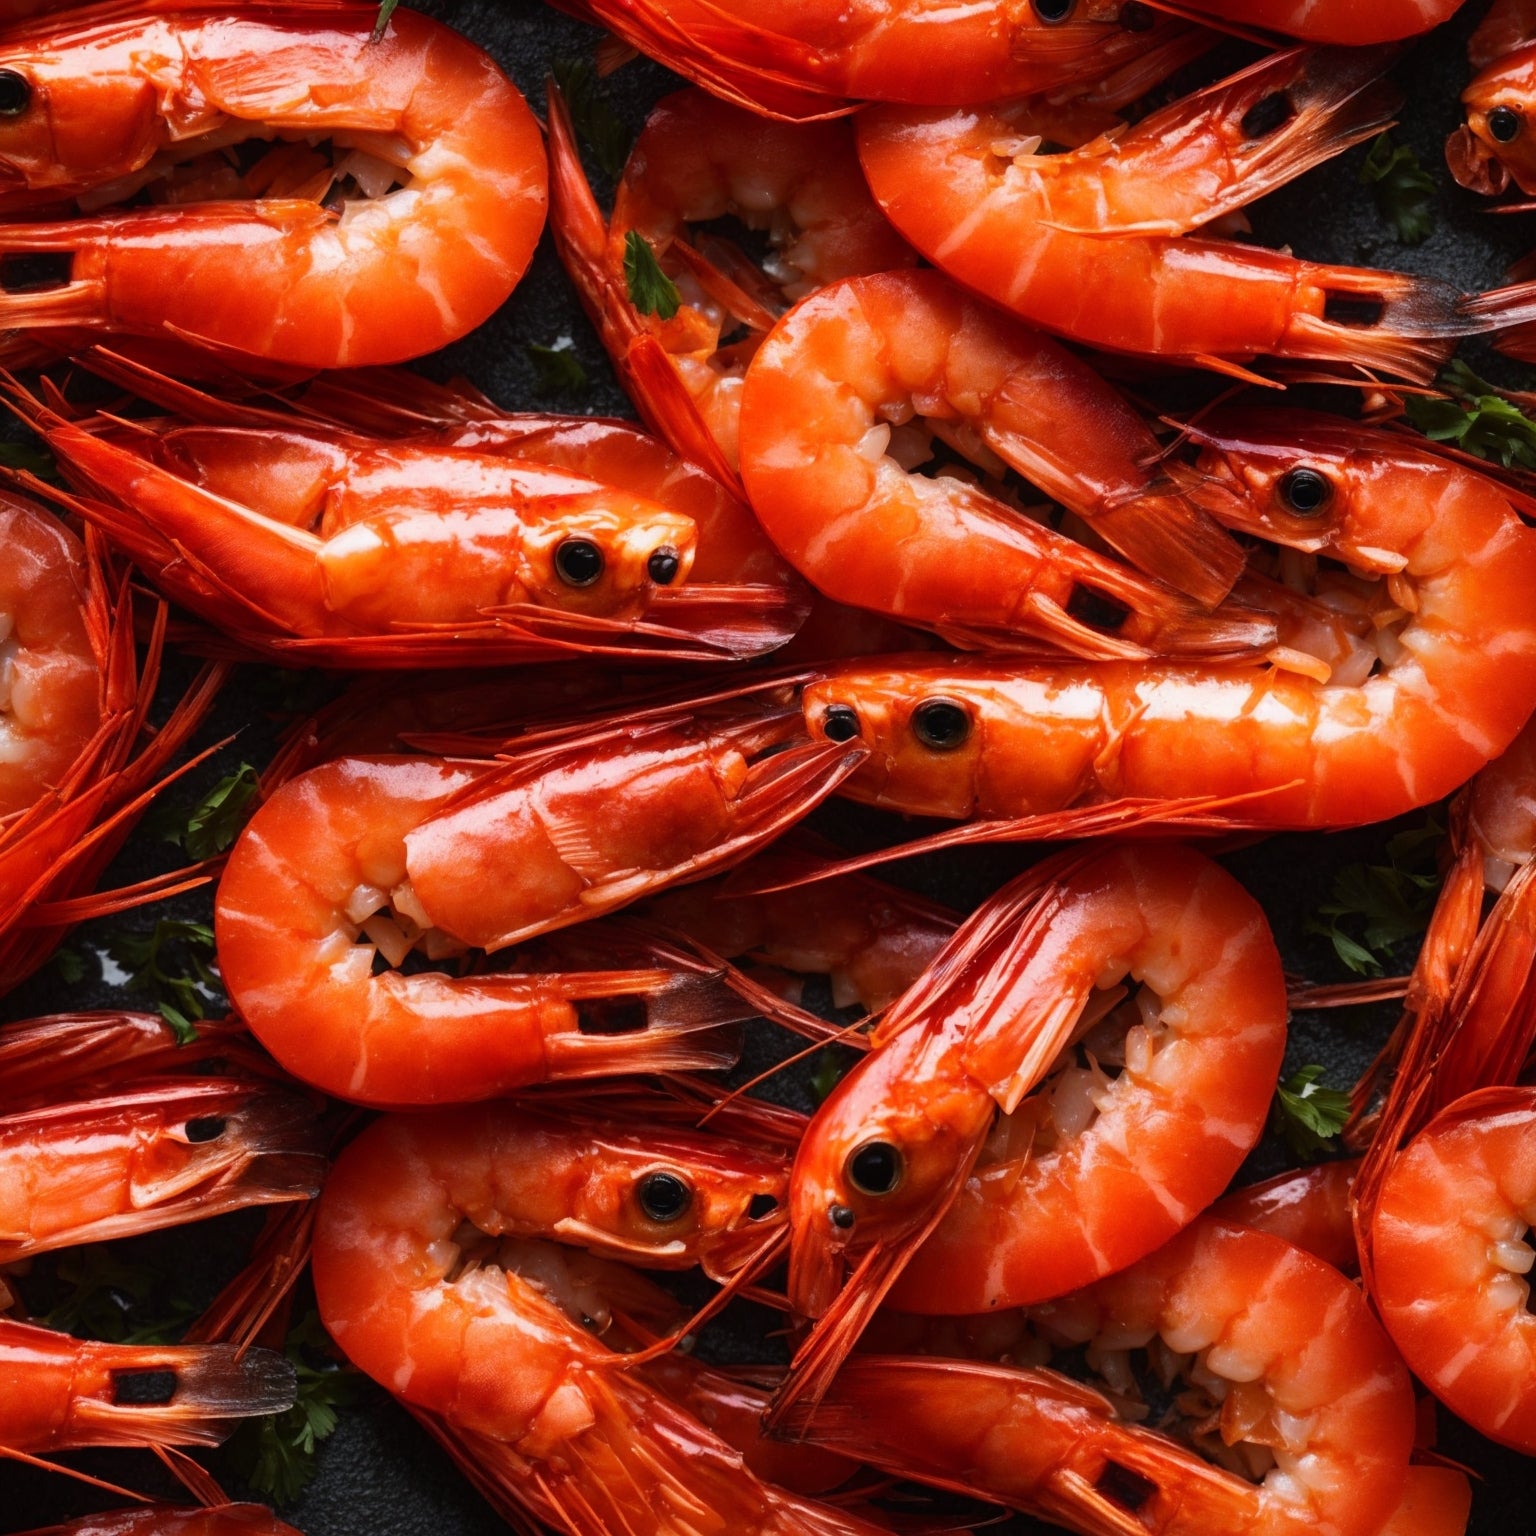 Prized Catch: Global Seafoods' Irresistible Wild Caught Shrimp